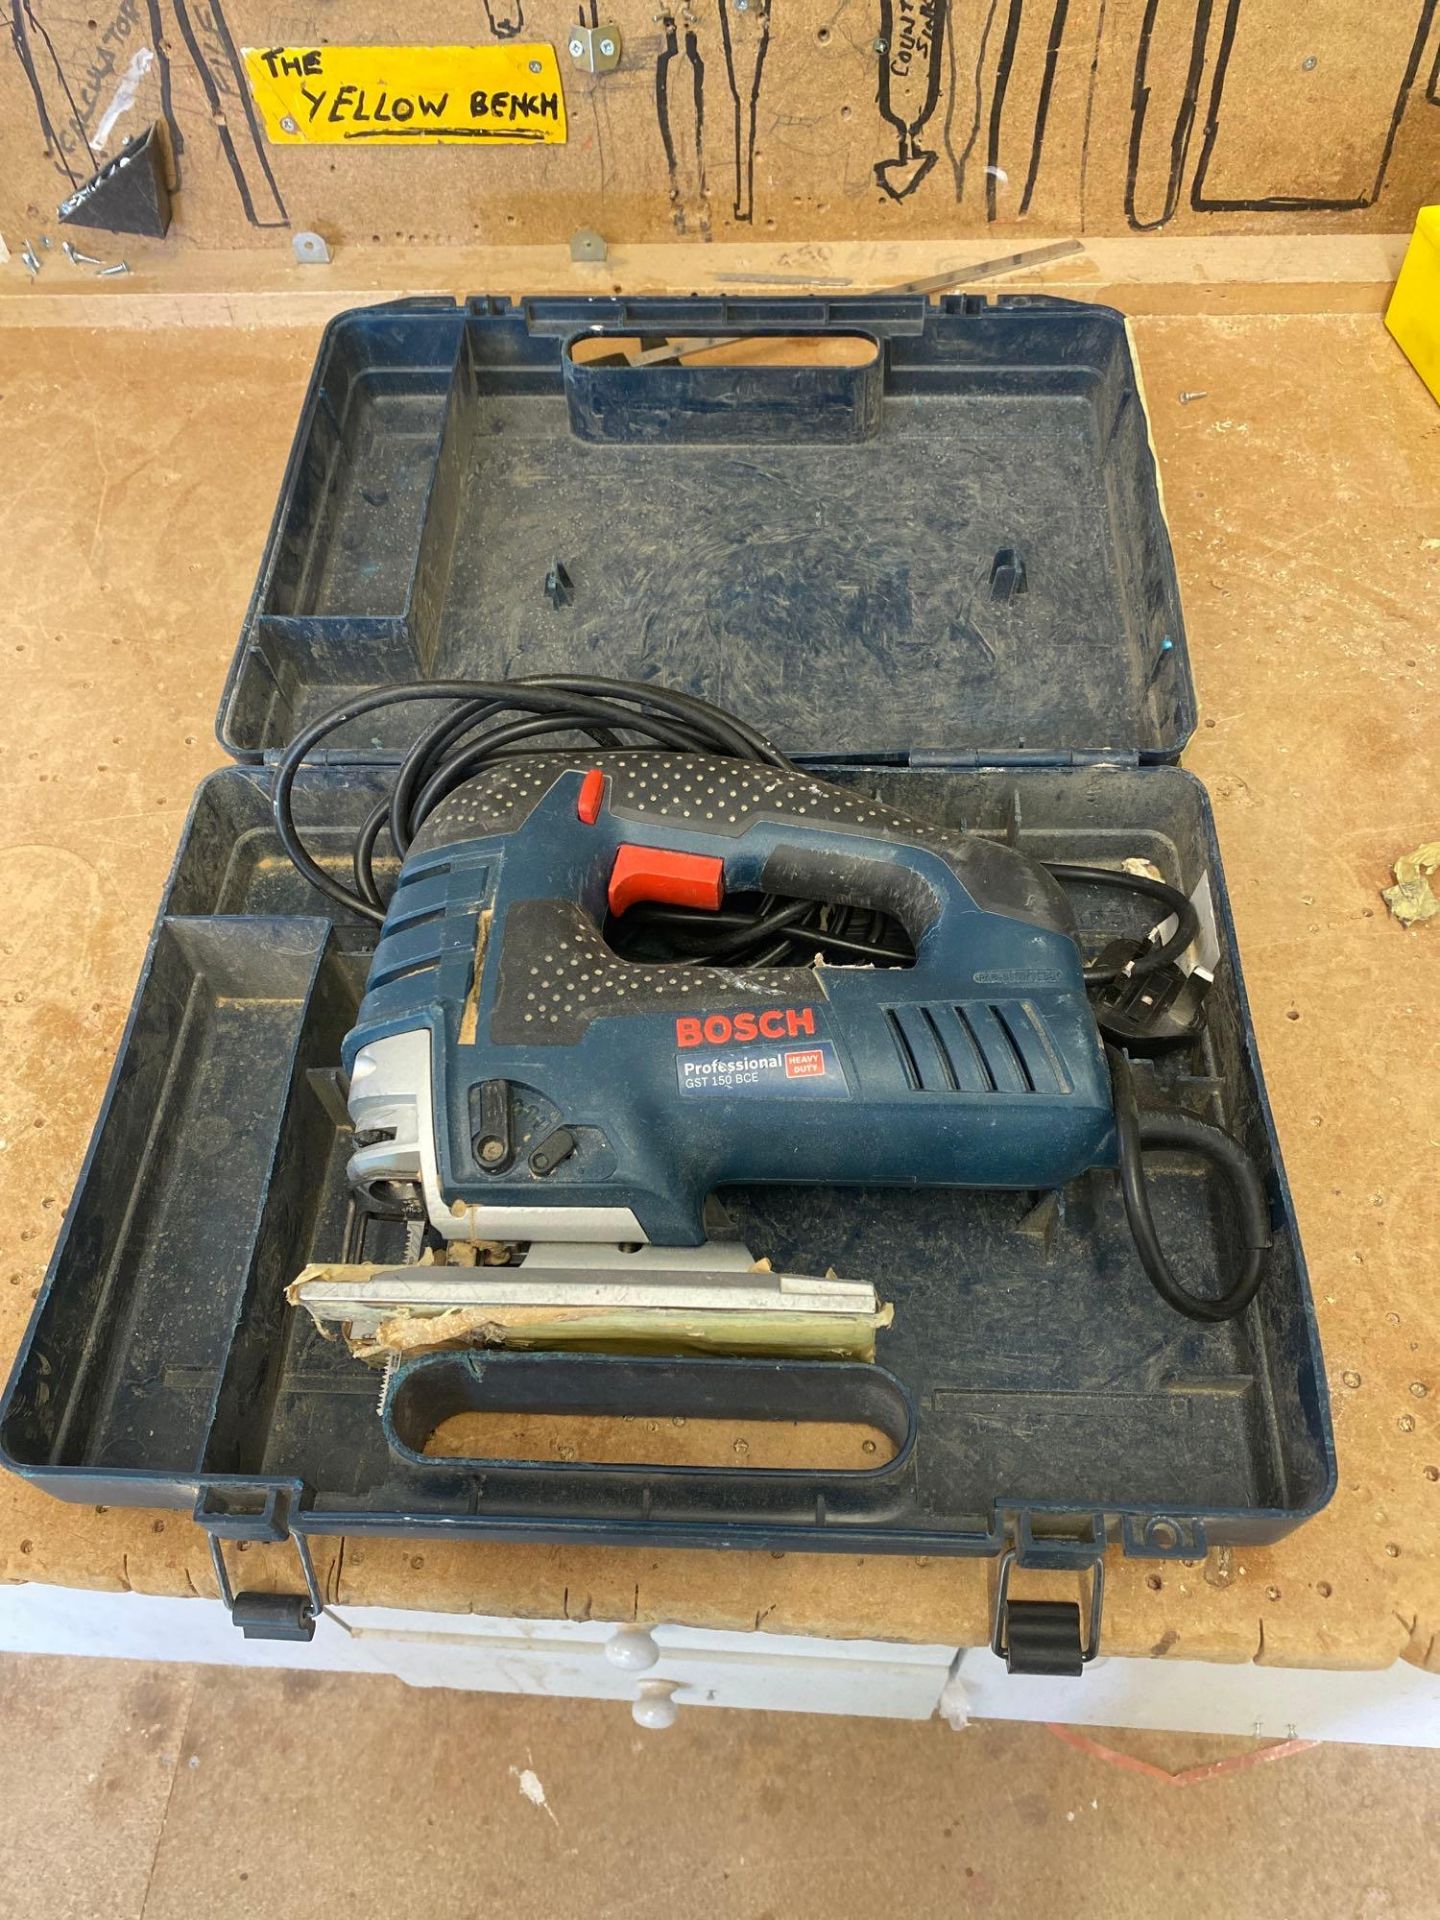 Bosch GST 150 BCE professional heavy duty jigsaw 240v complete with carry case